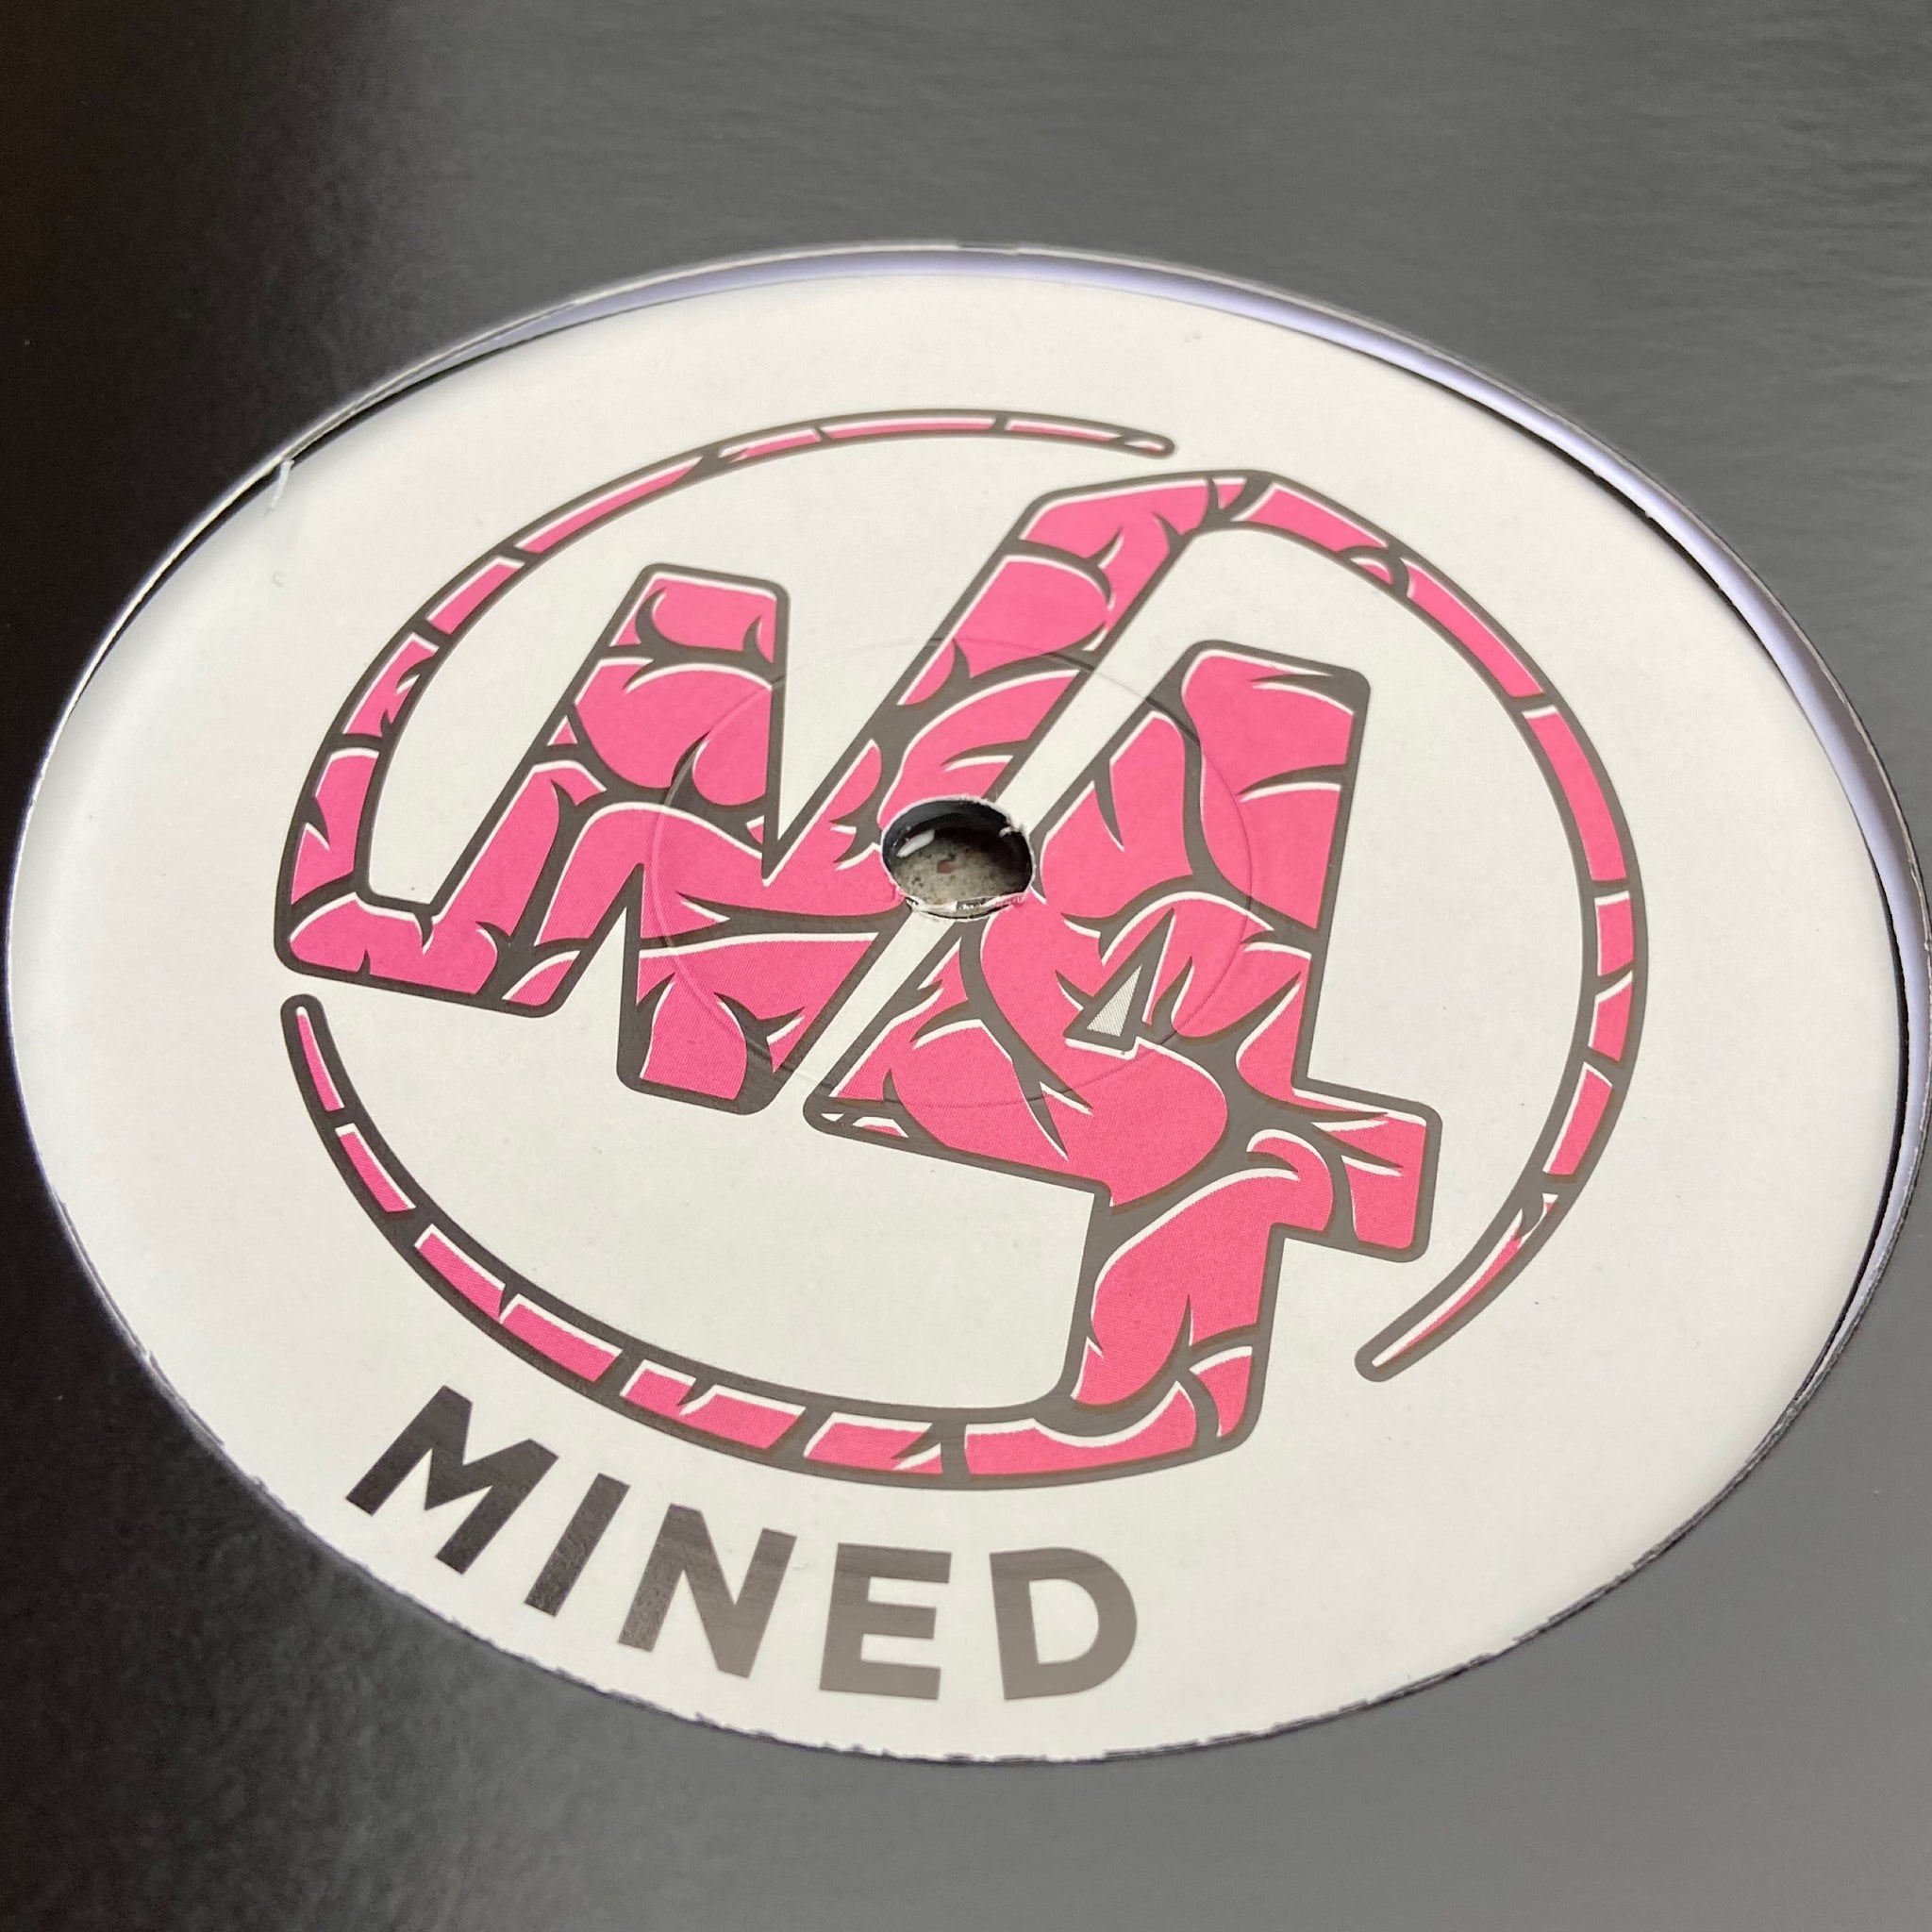 T-CUTS & PETE CANNON 'MINED014/N4010' 12"